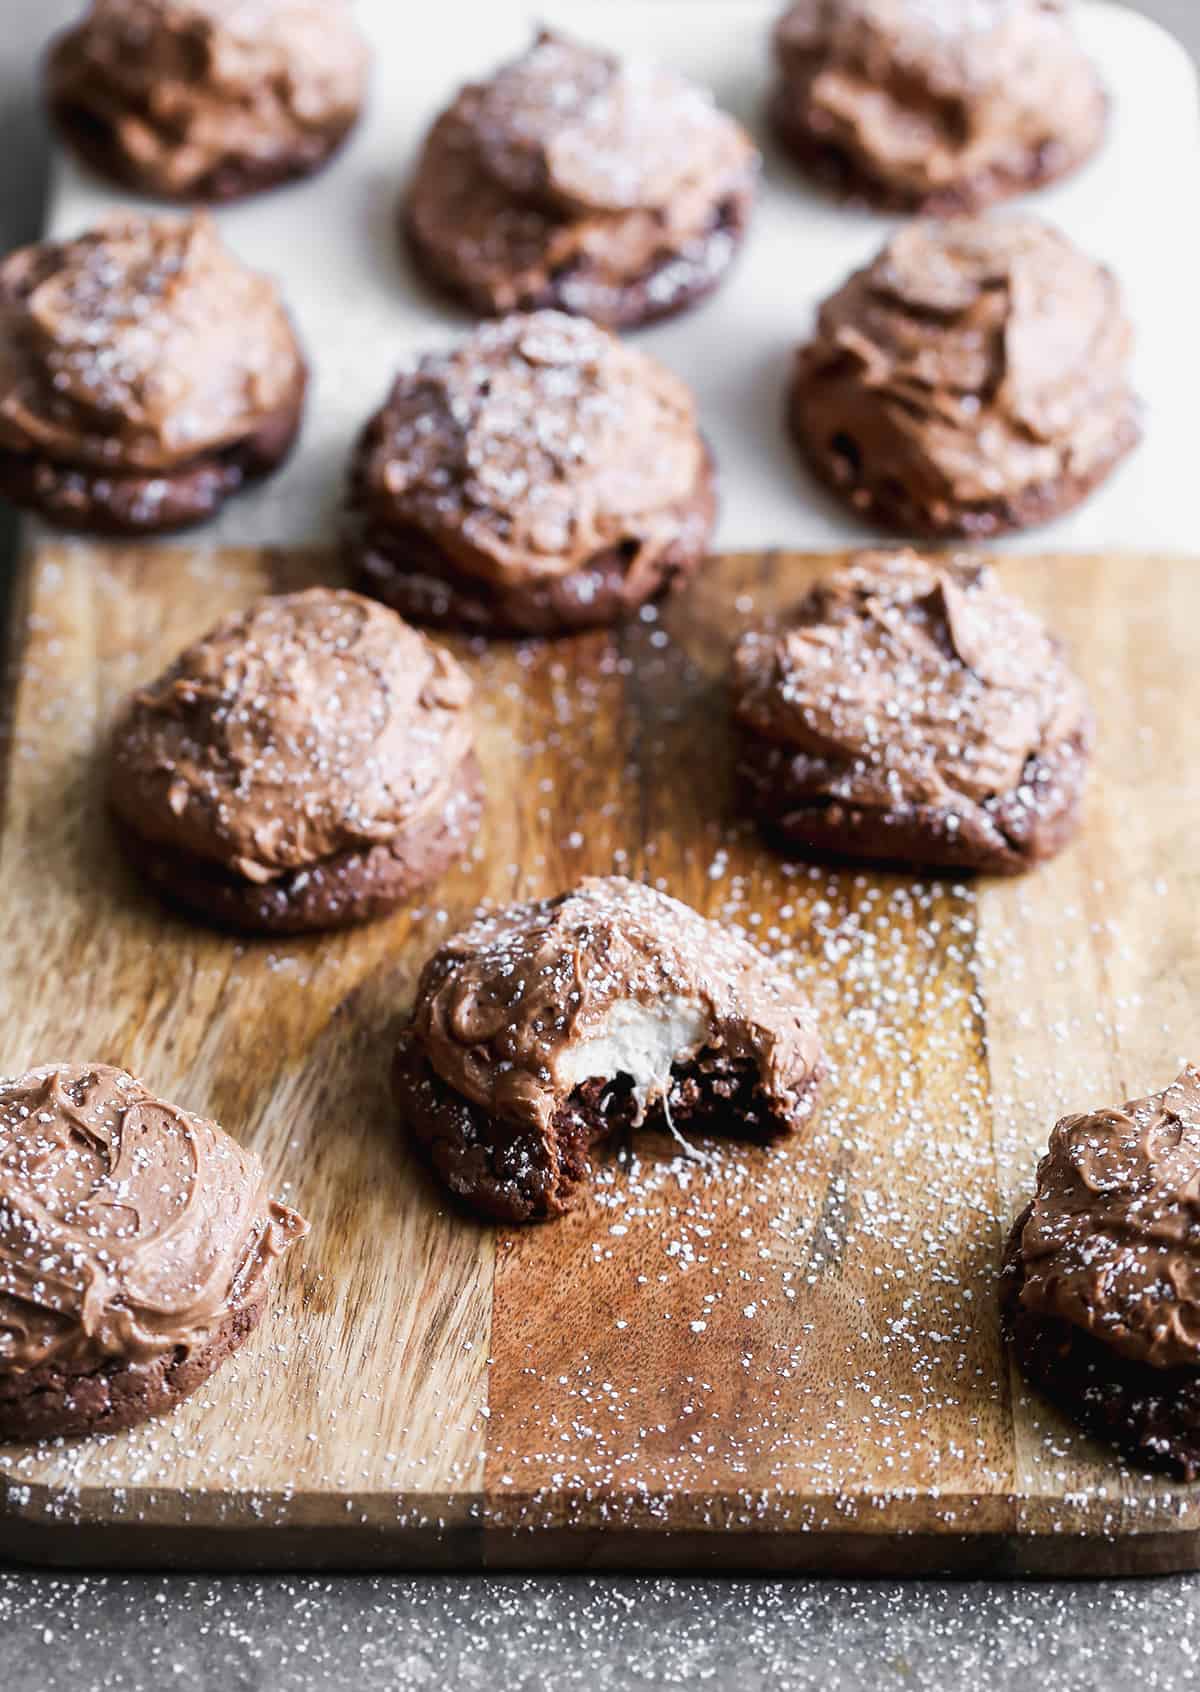 Chocolate Marshmallow Cookies on a wooden cutting board, dusted with powdered sugar with one bite taken out of one.